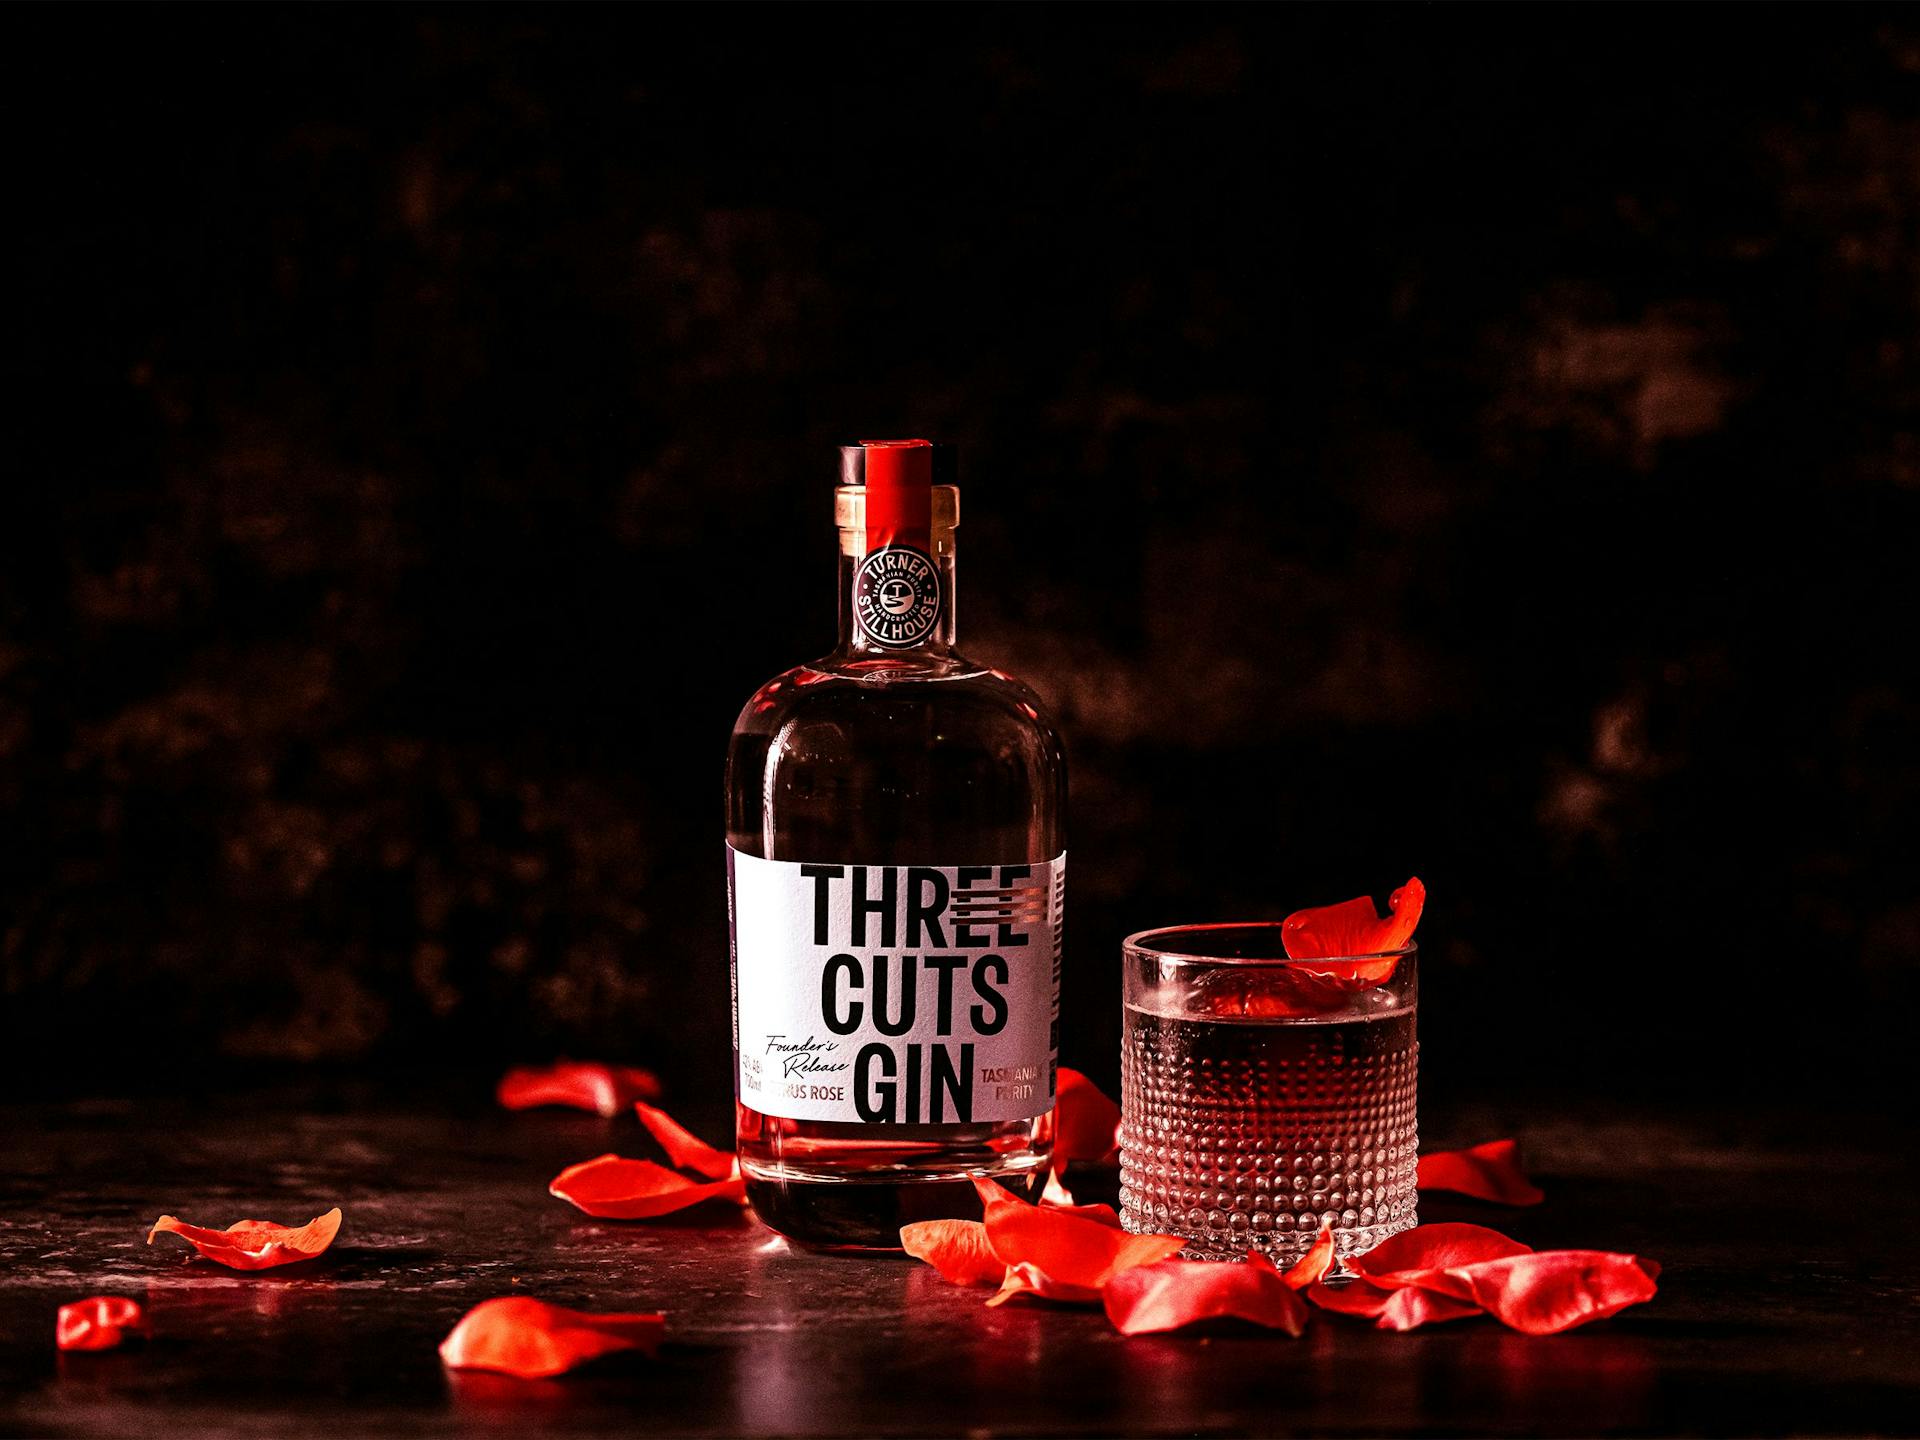 A glass and bottle of Three Cuts Gin surrounded by red rose petals